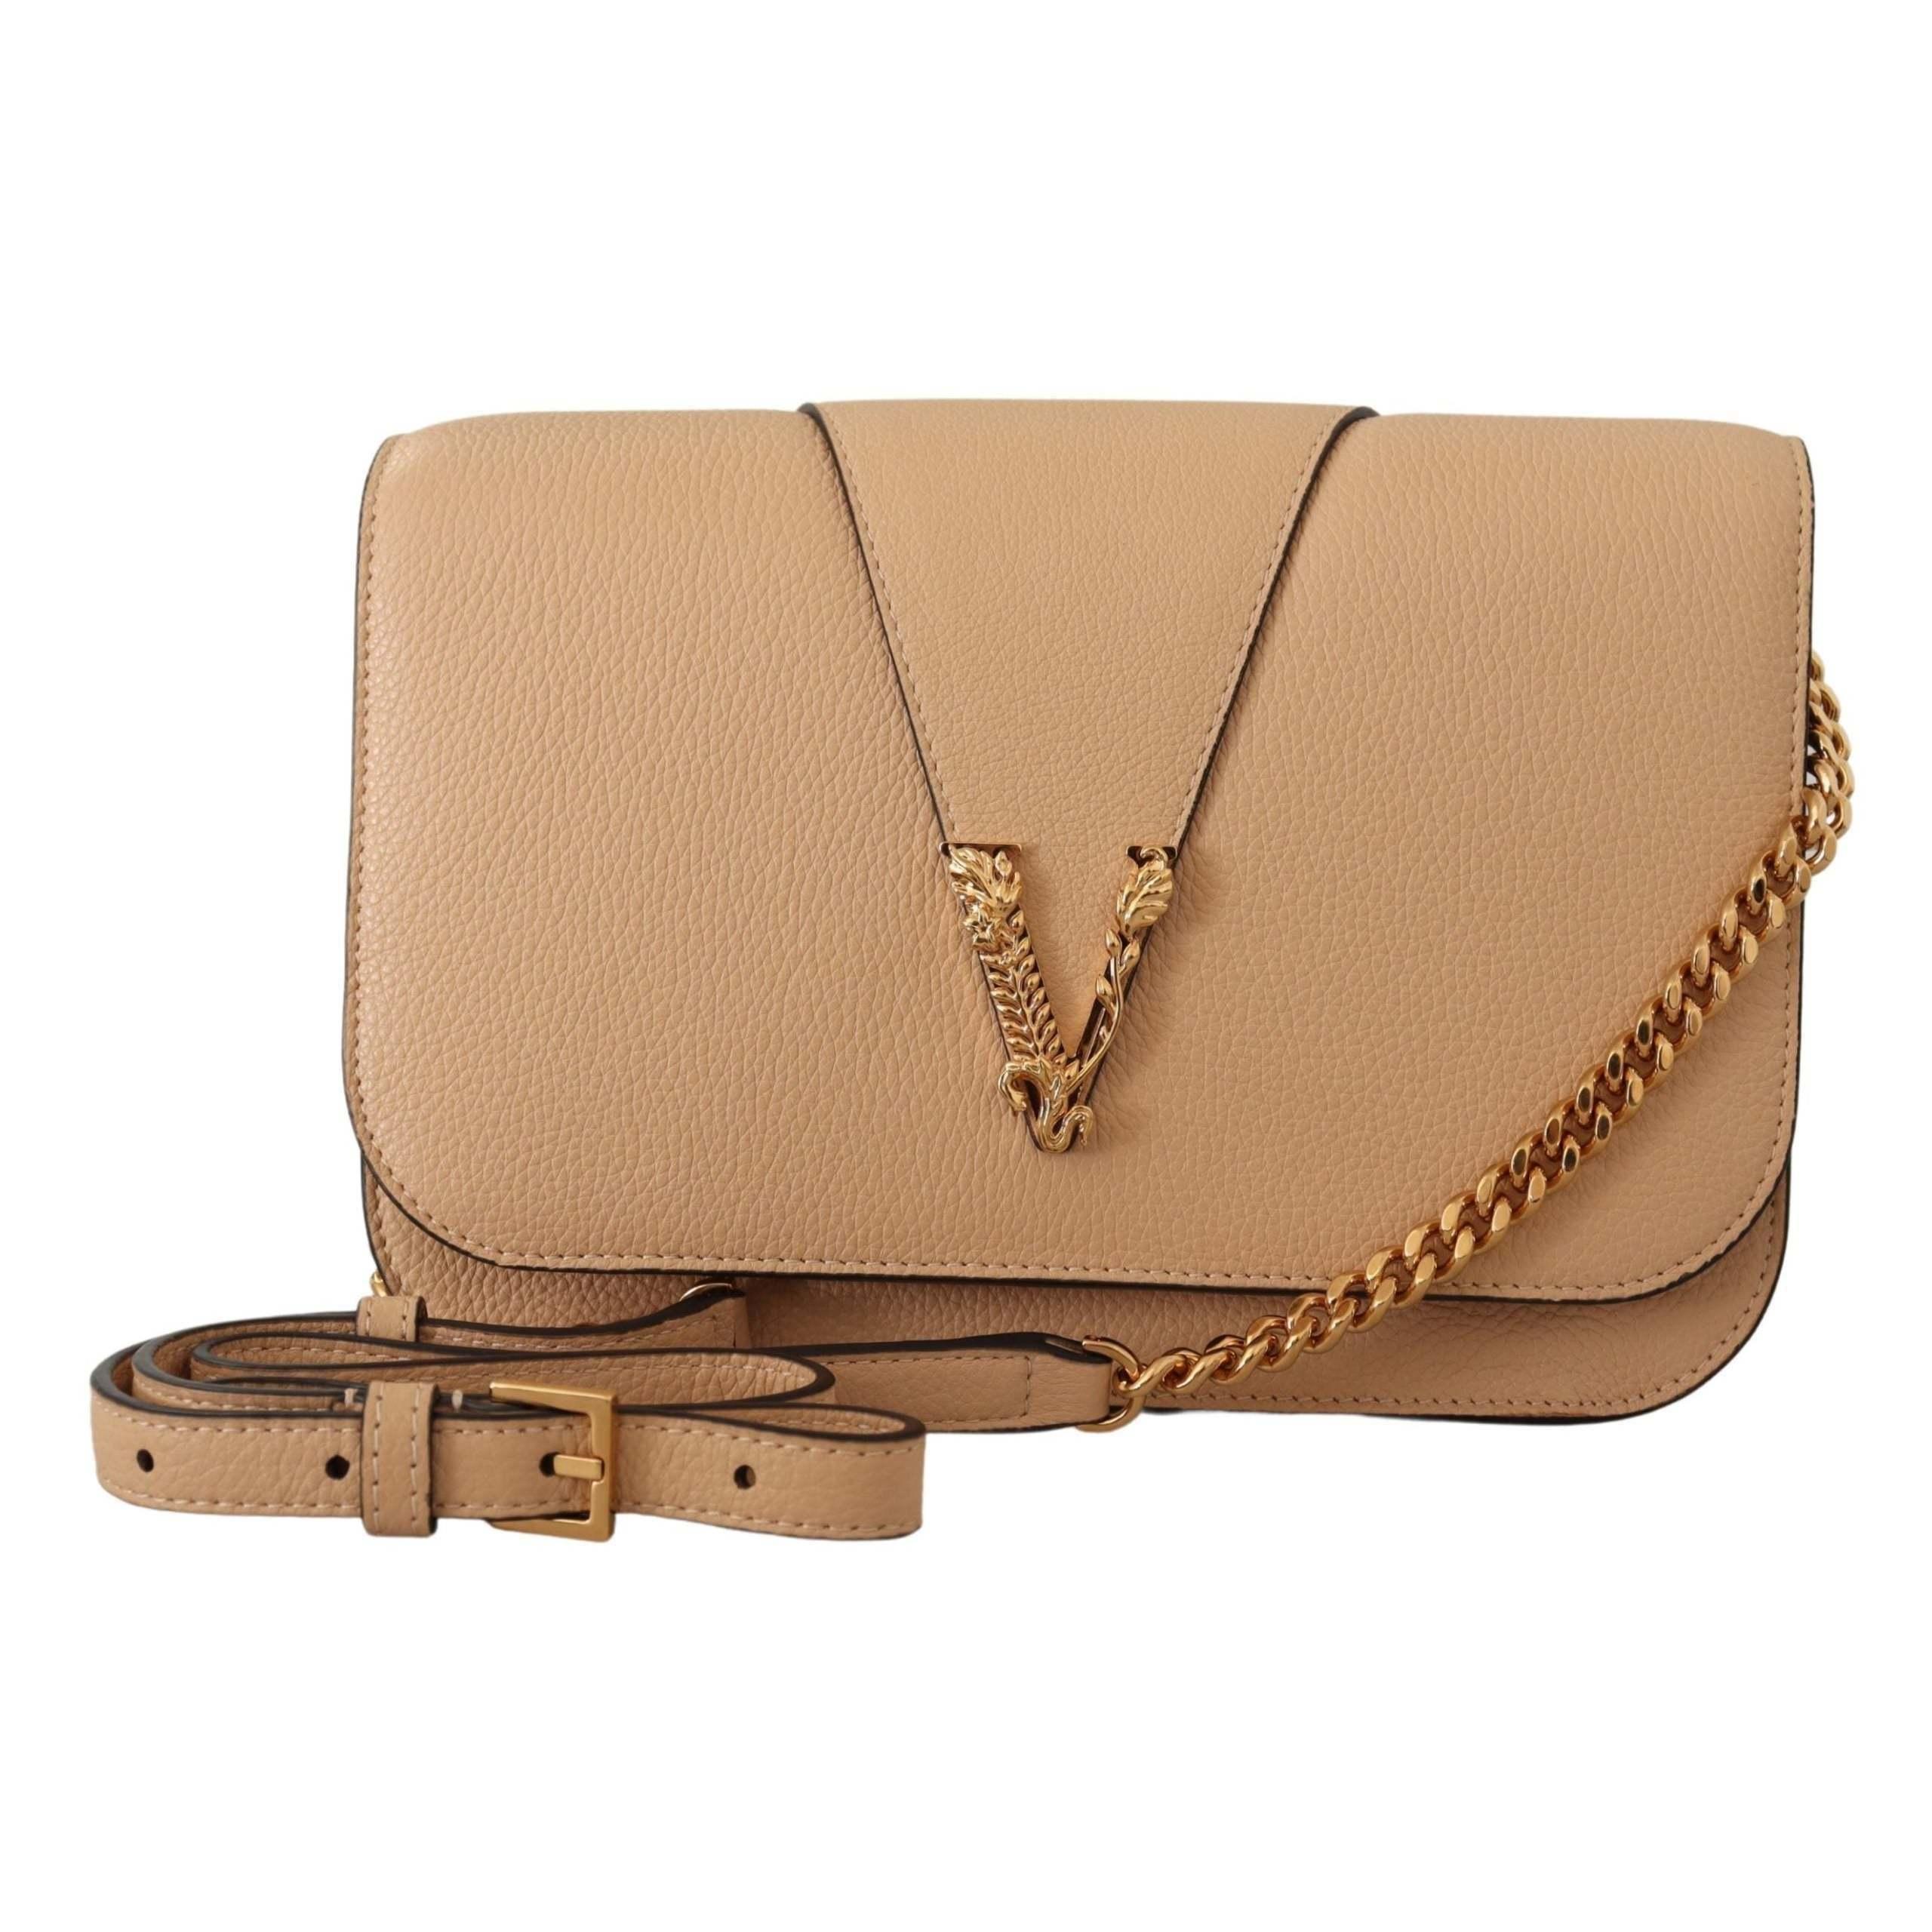 Versace Nude Calf Leather Crossbody Bag in Natural | Lyst